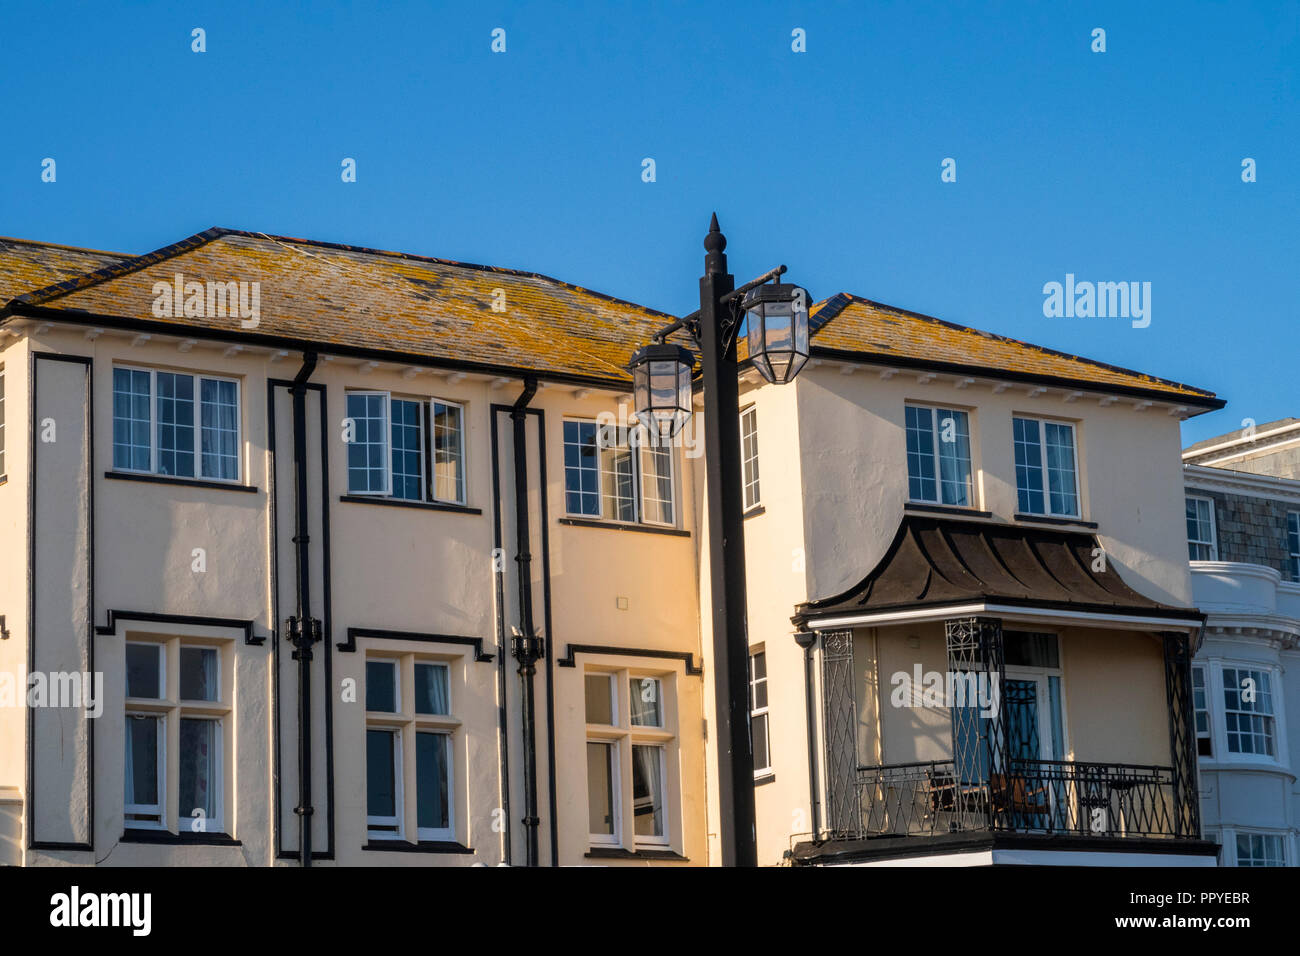 Yellow algae covering the roof of the Bedford Hotel in Sidmouth, contrasted by a bright blue sky. Stock Photo